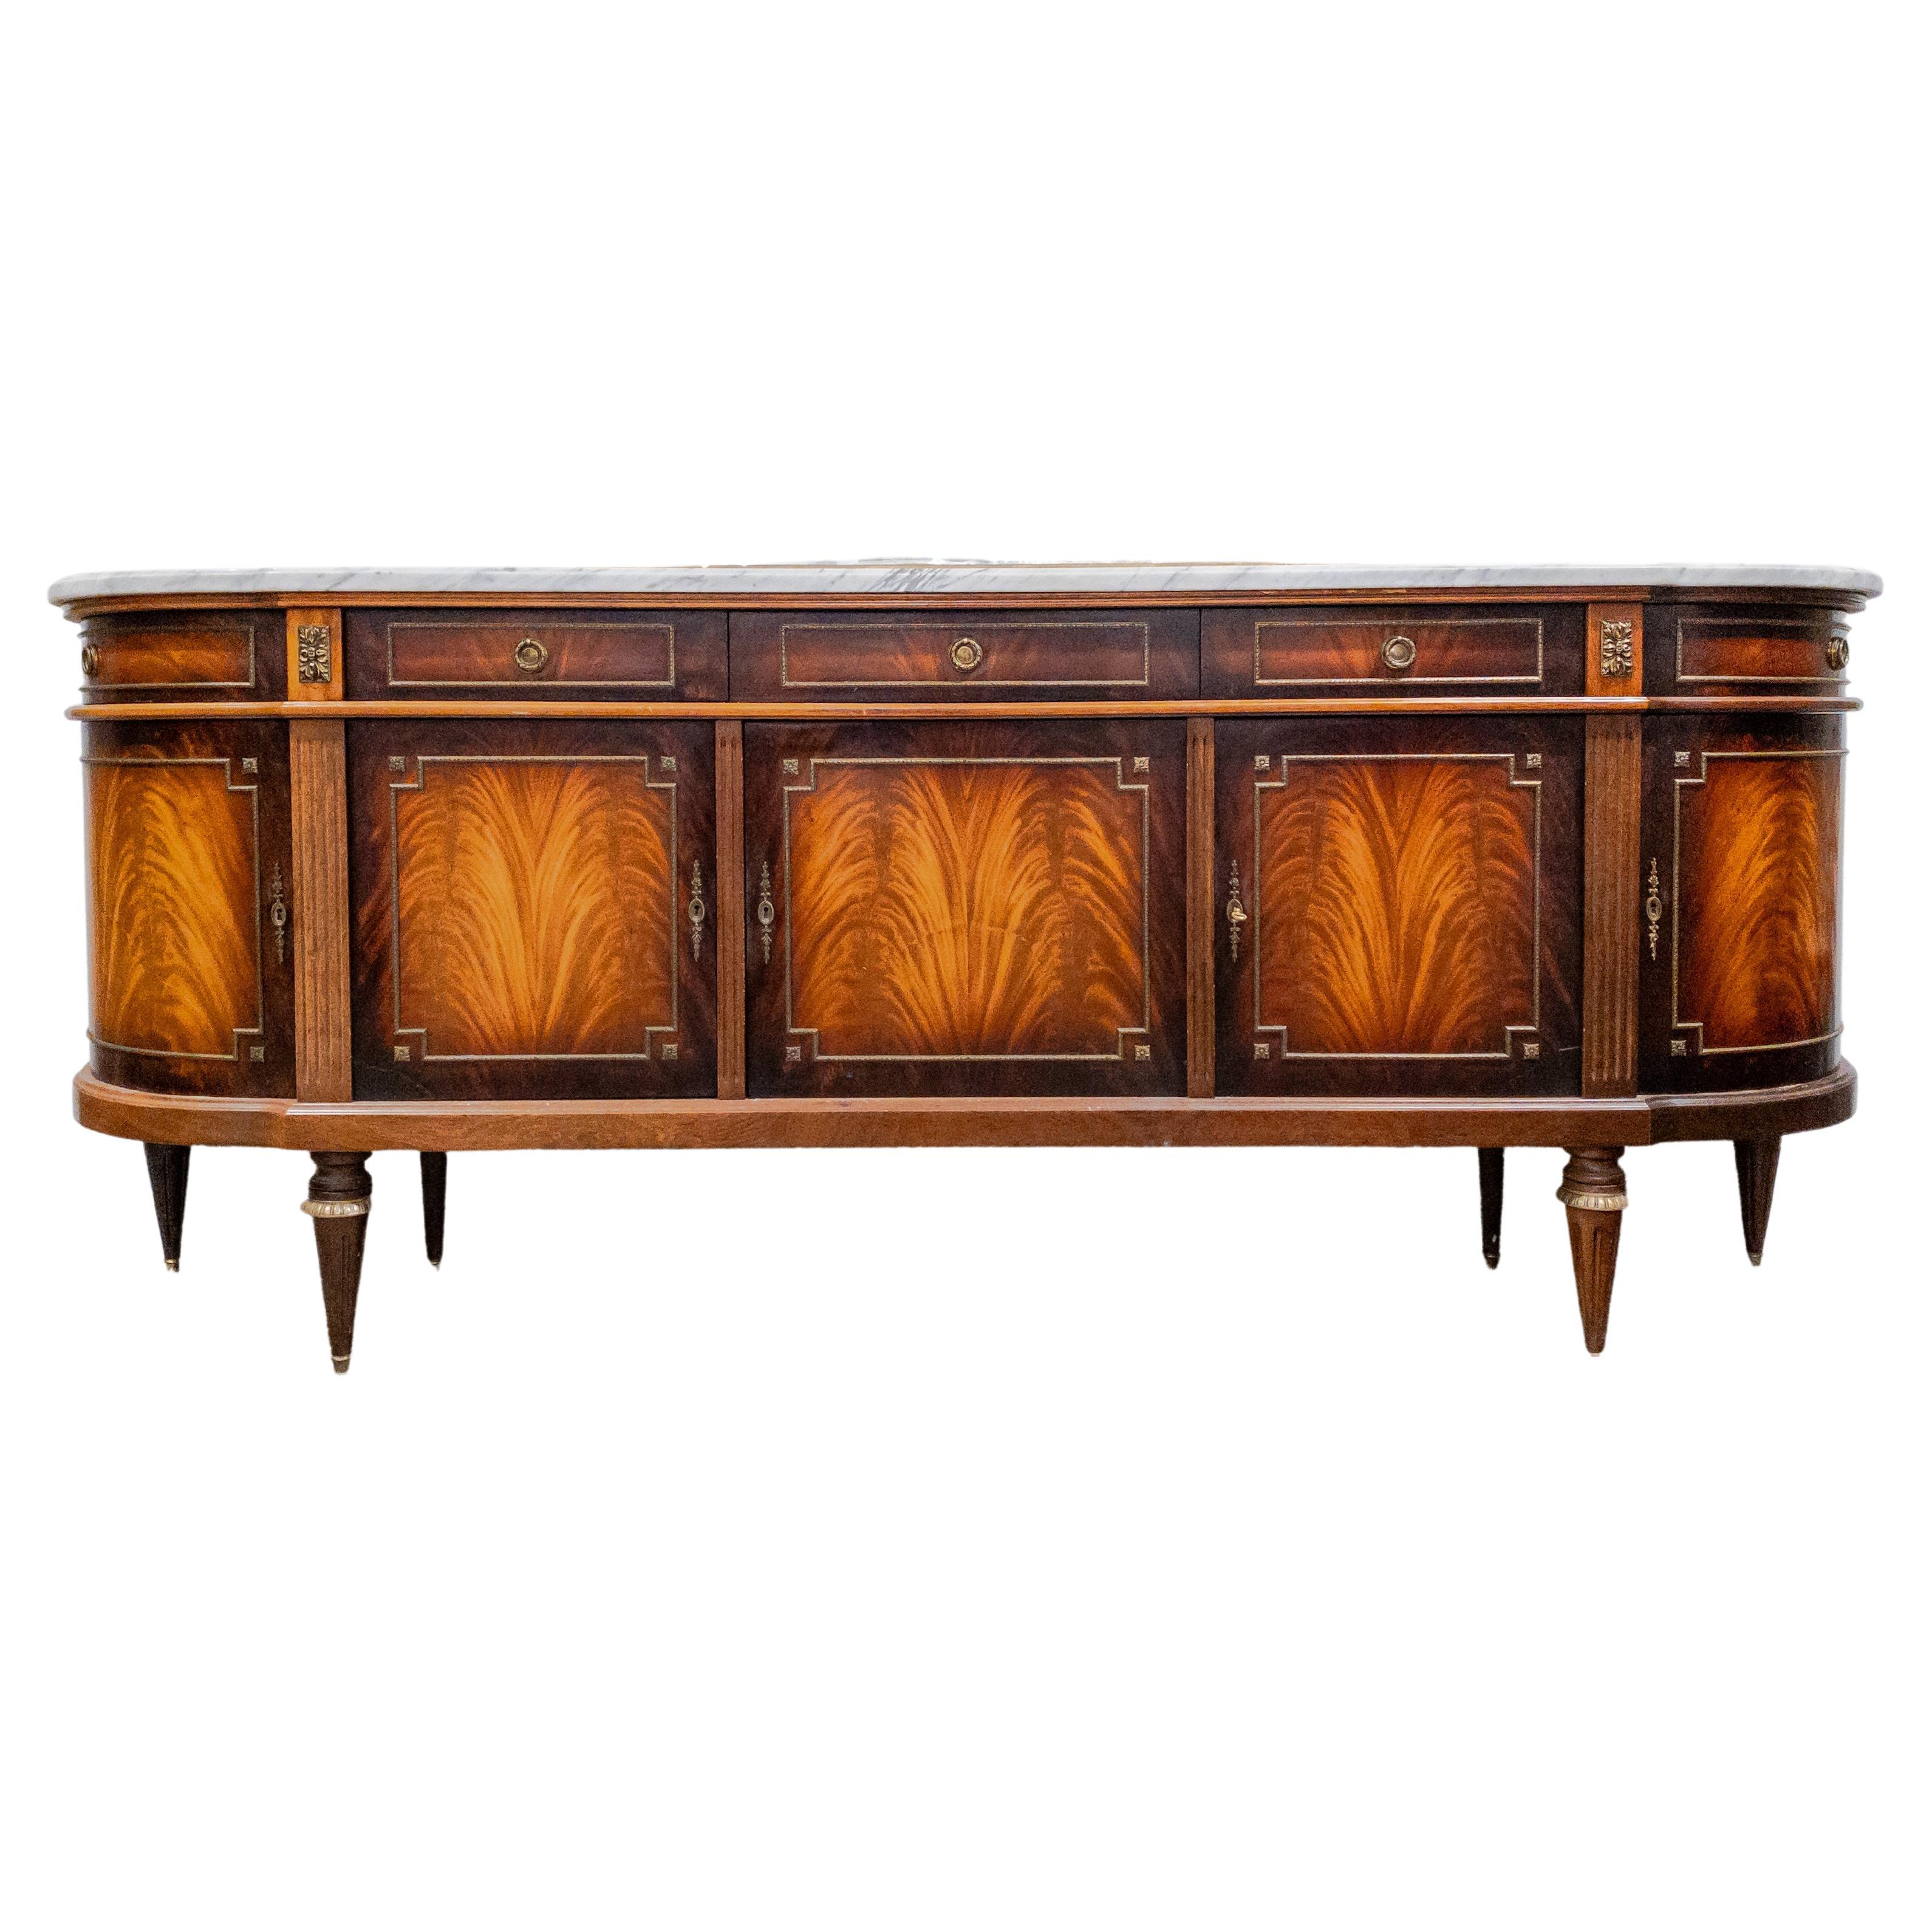 Impressive Louis XVI Style Marble and Mahogany Buffet For Sale